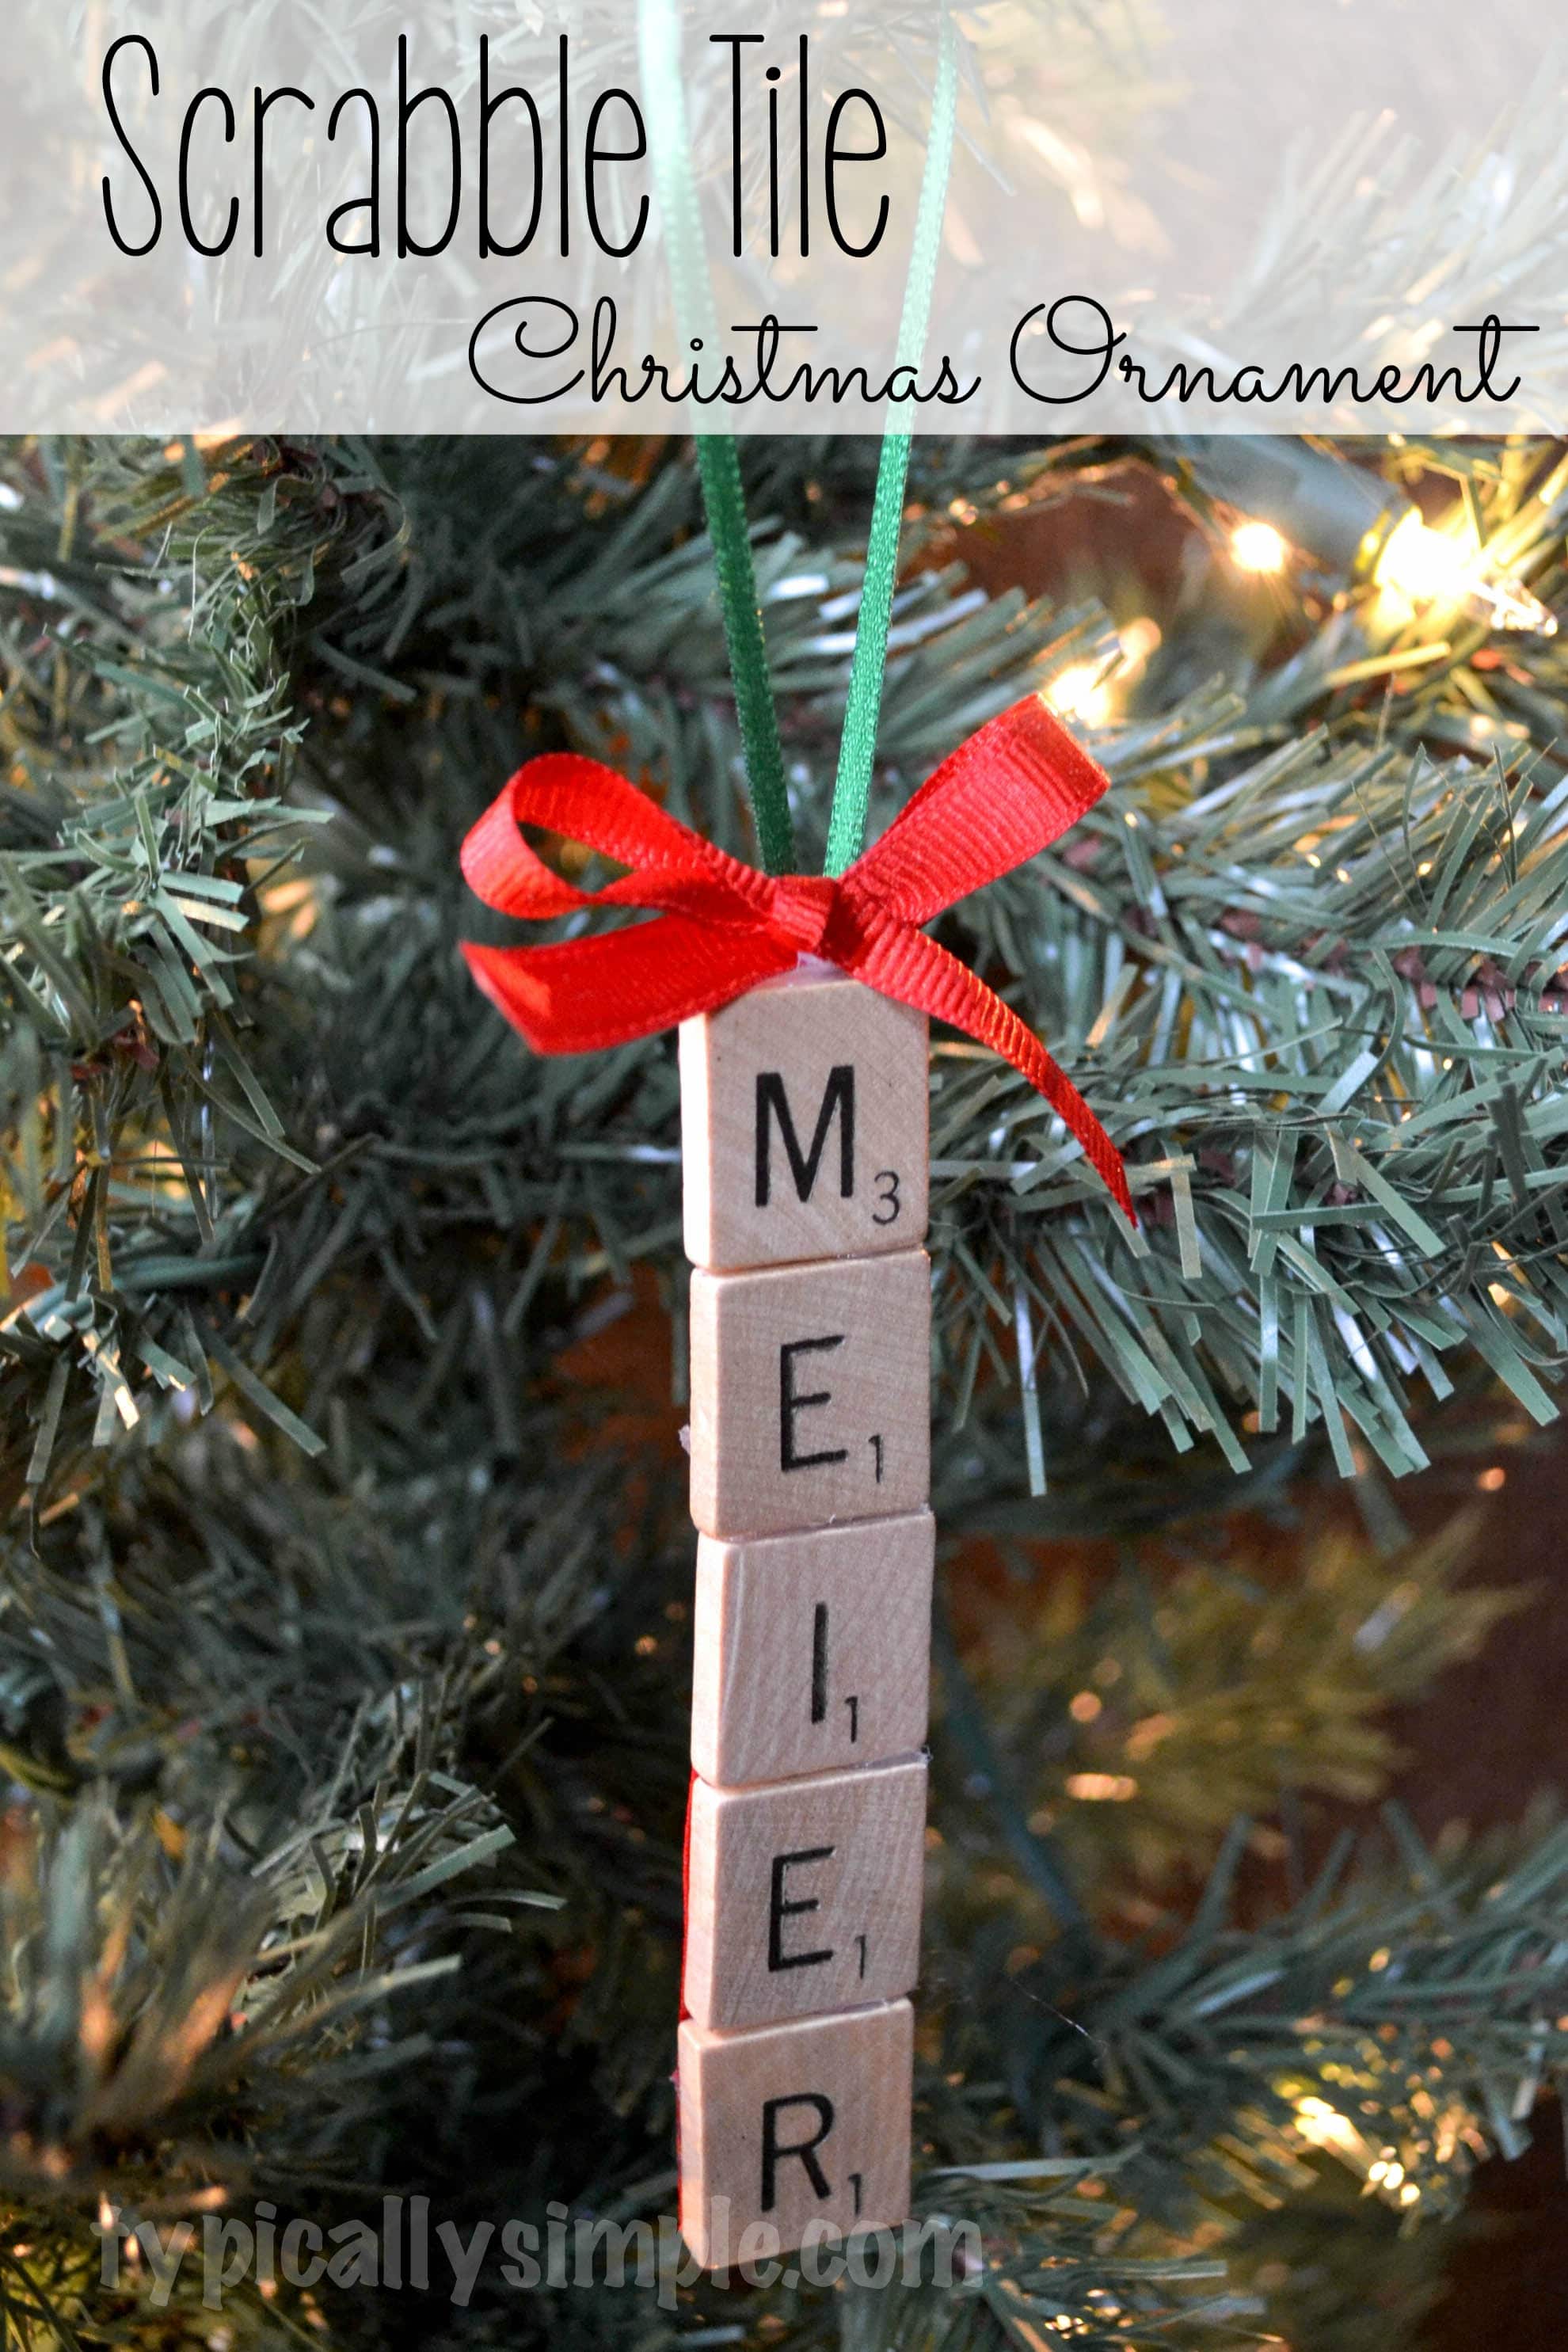 For the Scrabble lovers in your life, craft this simple Christmas ornament using Scrabble tiles!